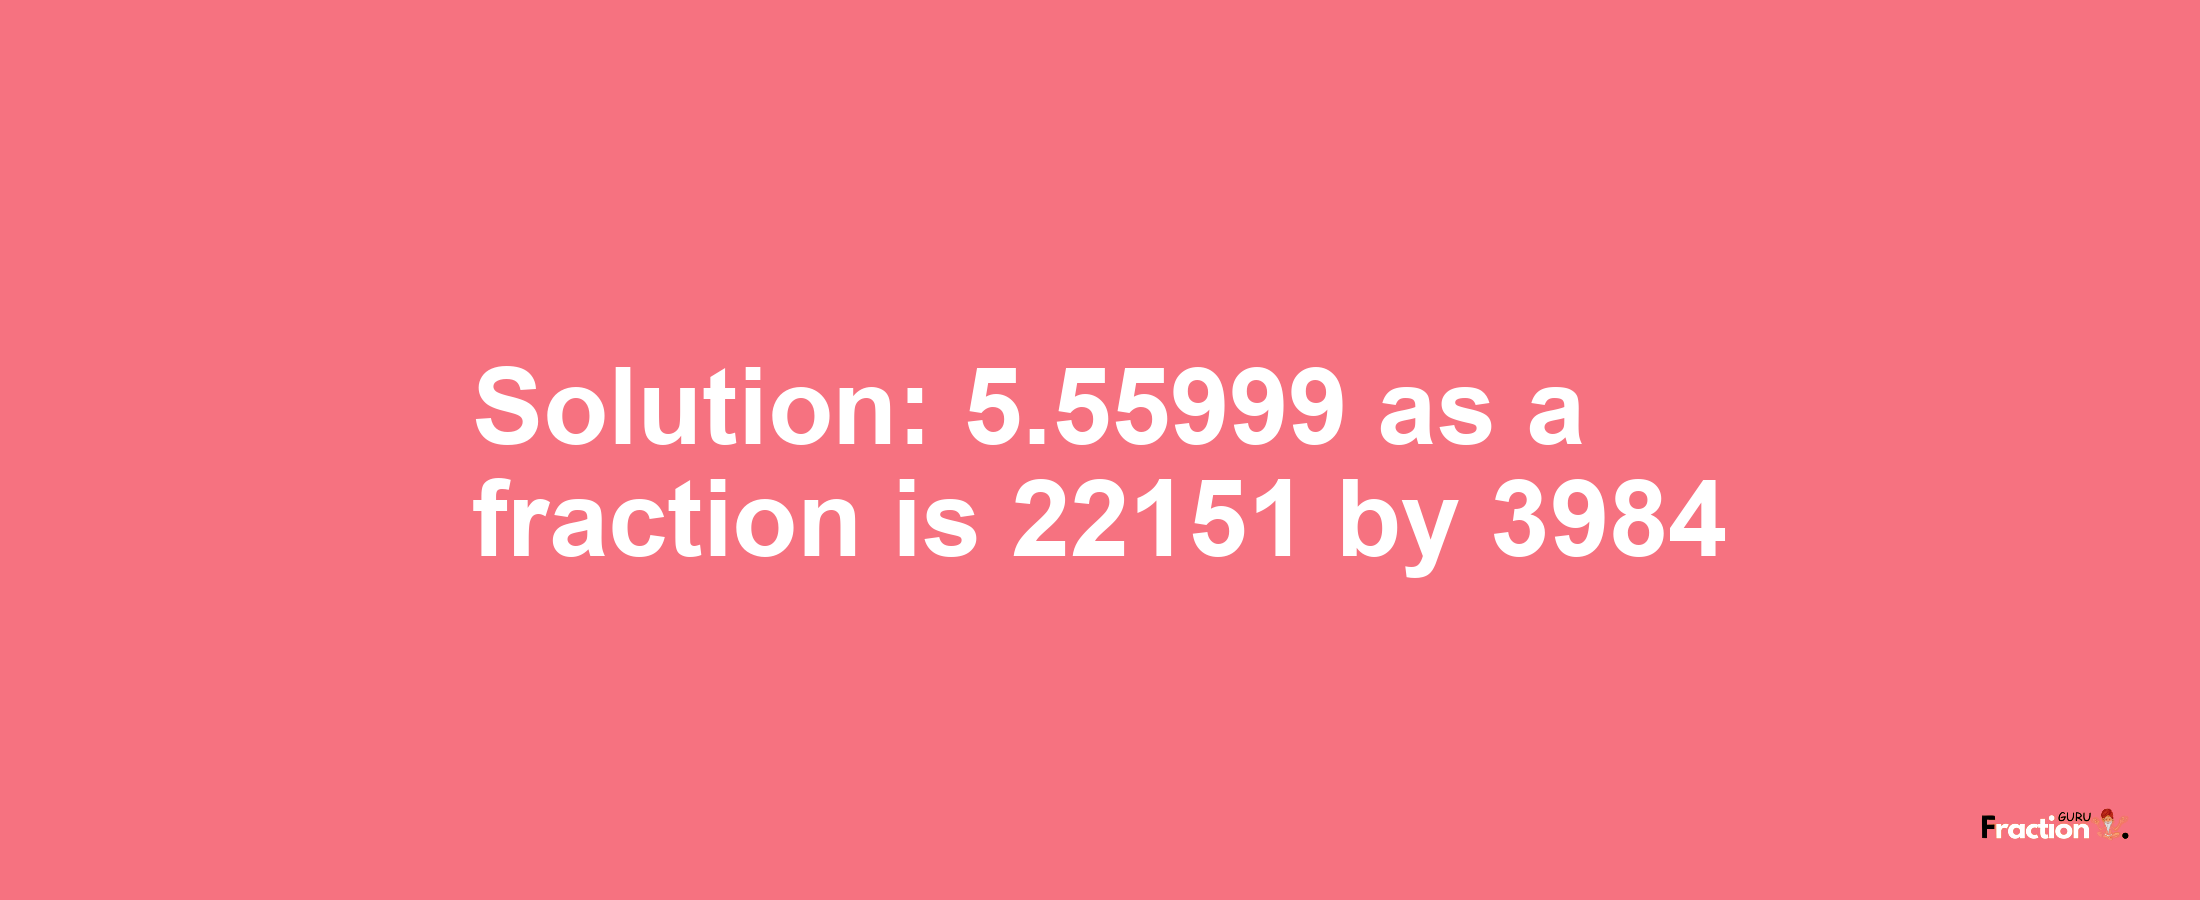 Solution:5.55999 as a fraction is 22151/3984